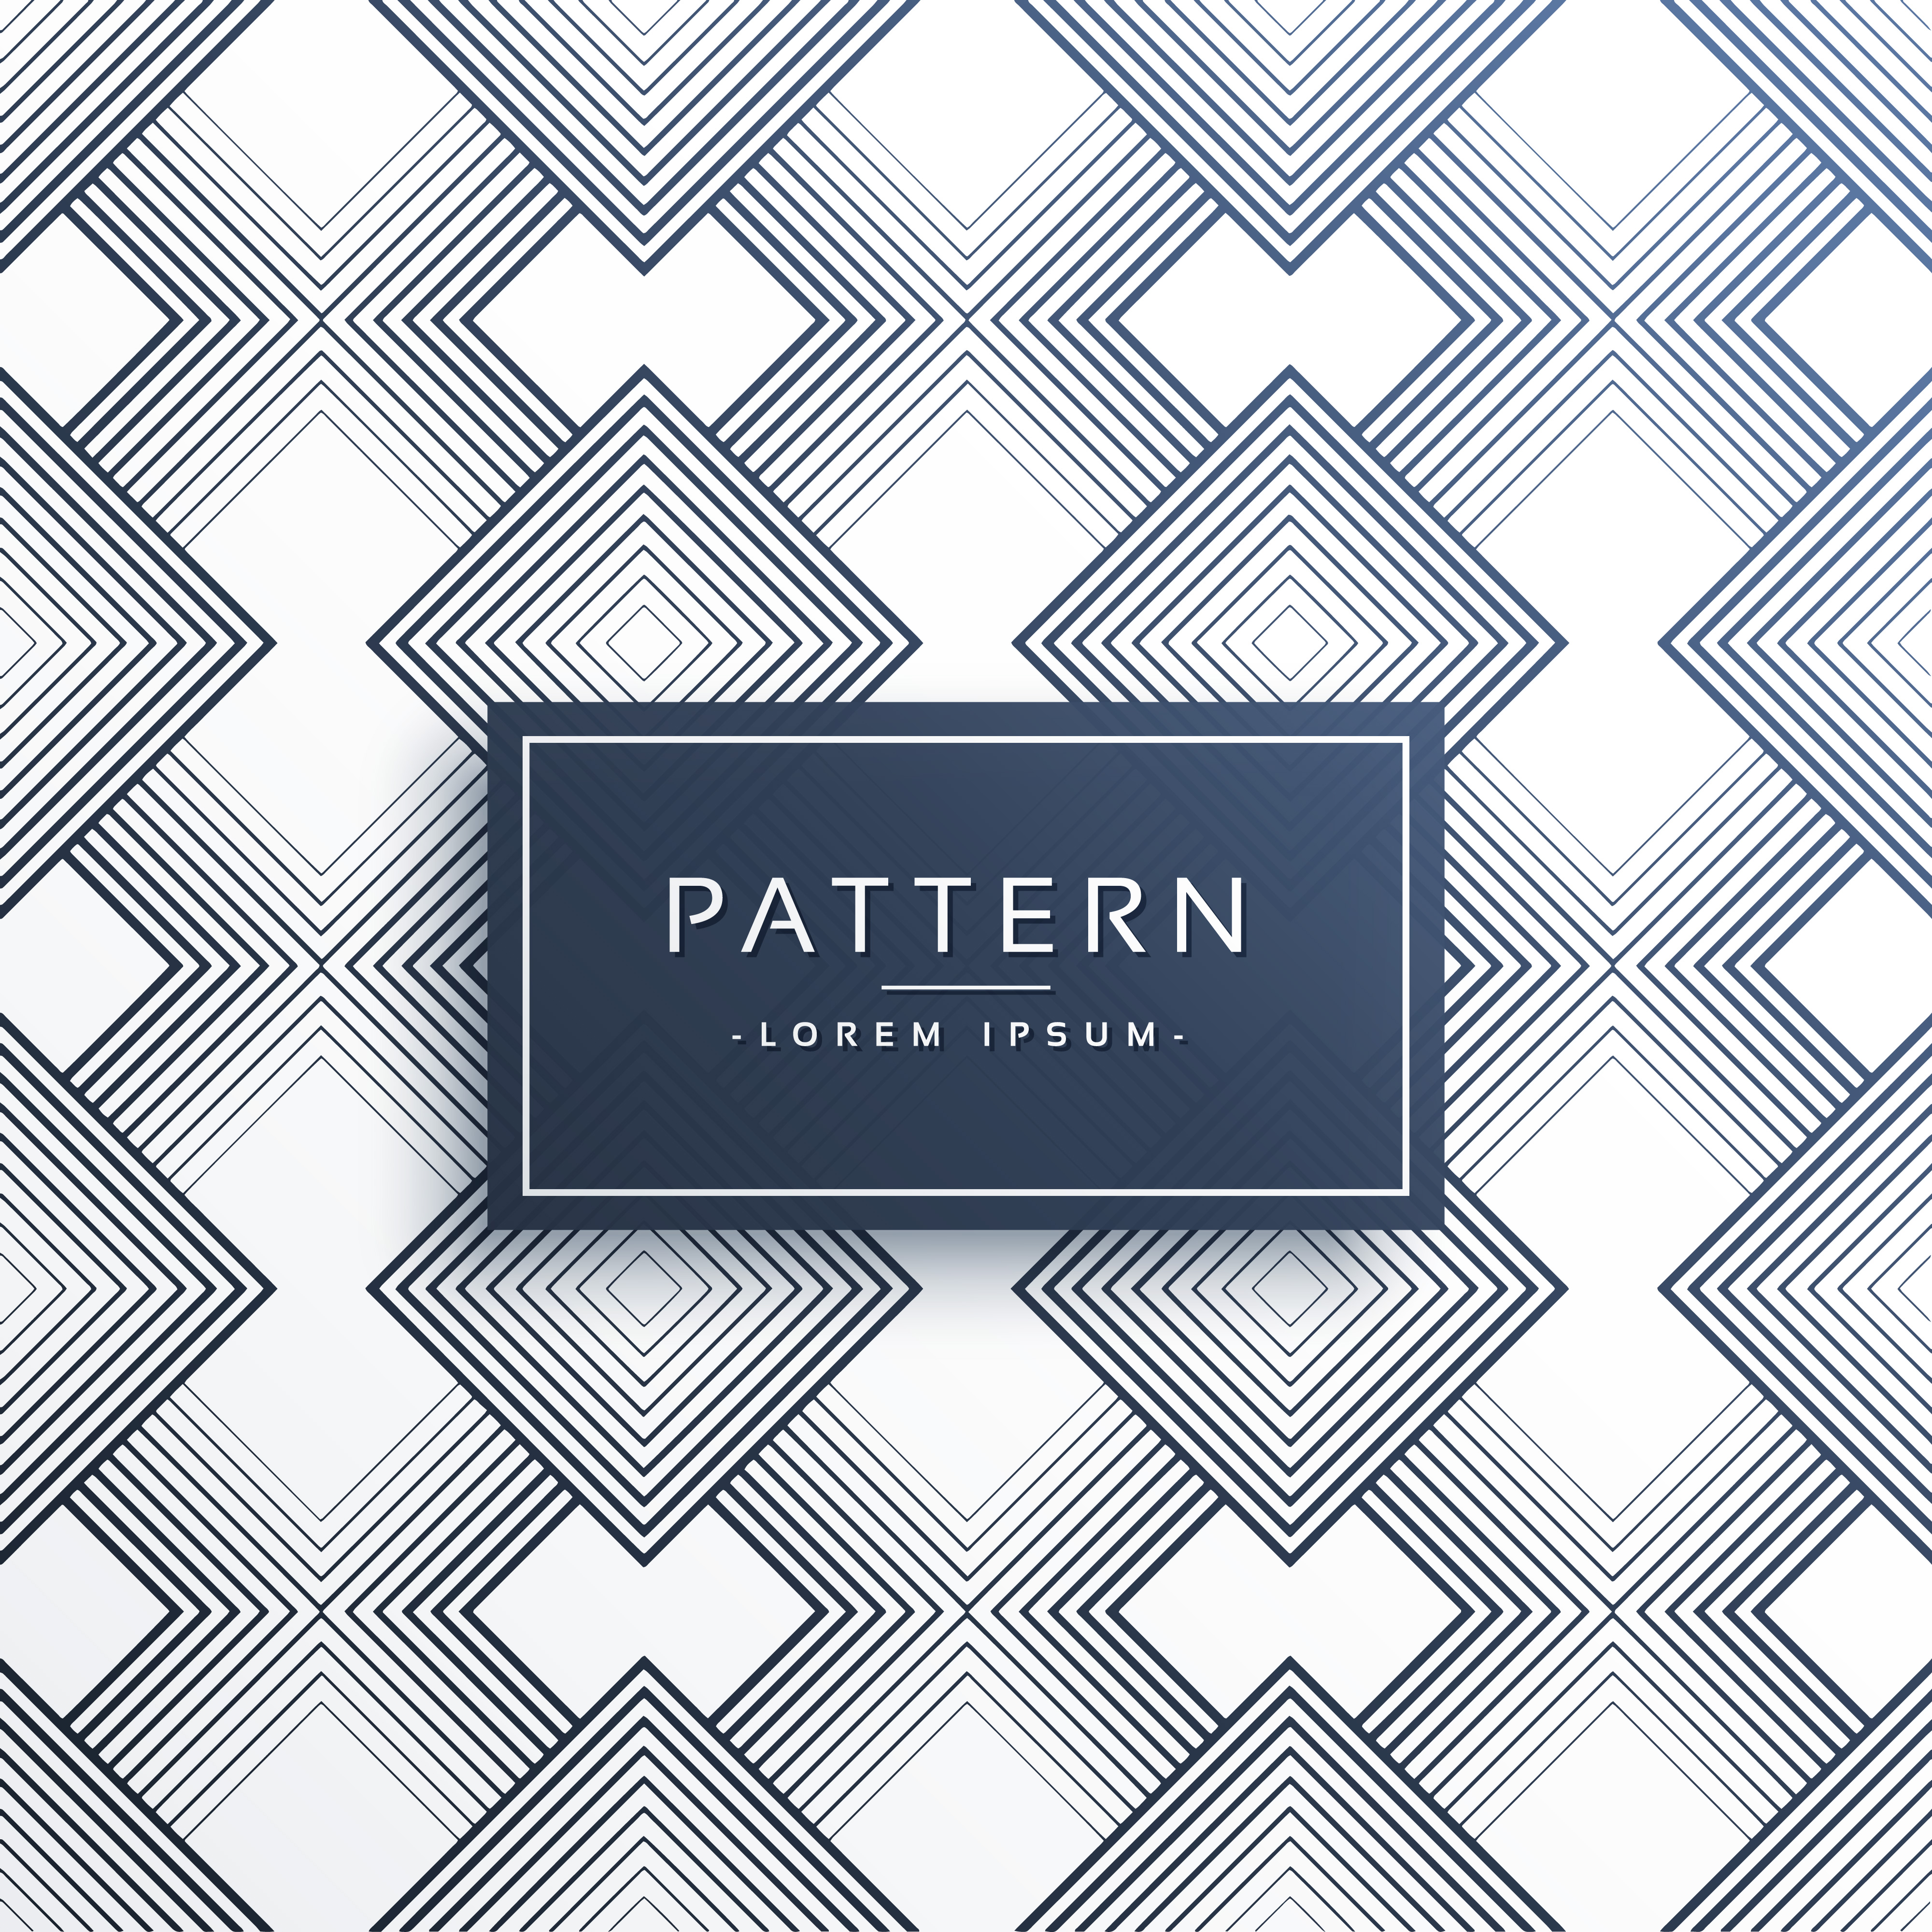 abstract geometric diagonal lines pattern design - Download Free Vector ...
 Line Pattern Design